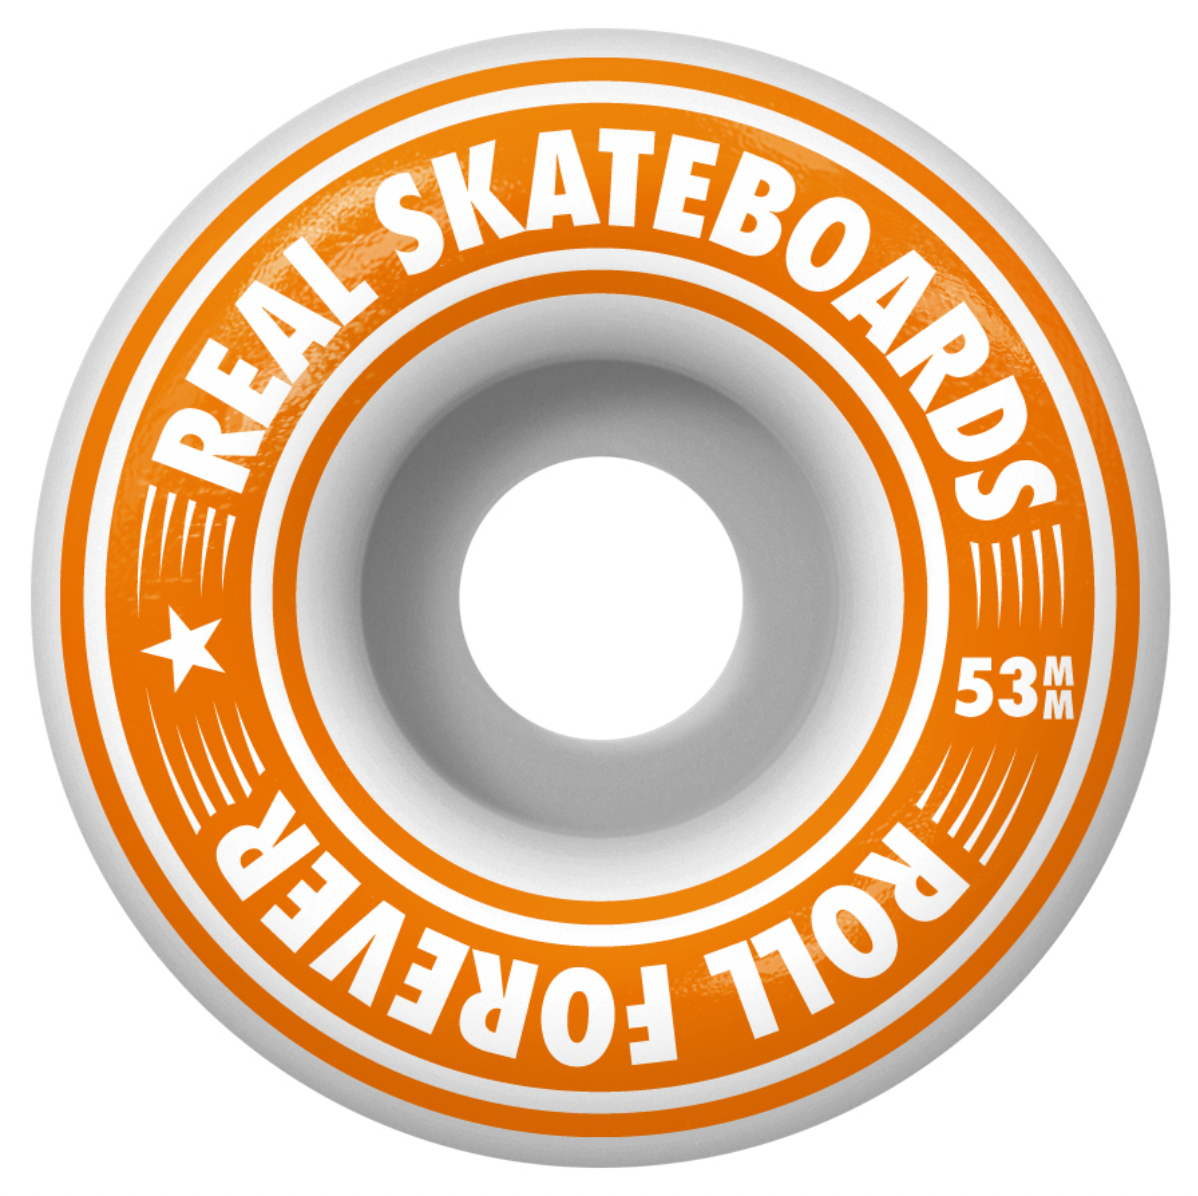 REAL COMPLETE - CLASSIC OVAL YELLOW SM (7.5") - The Drive Skateshop